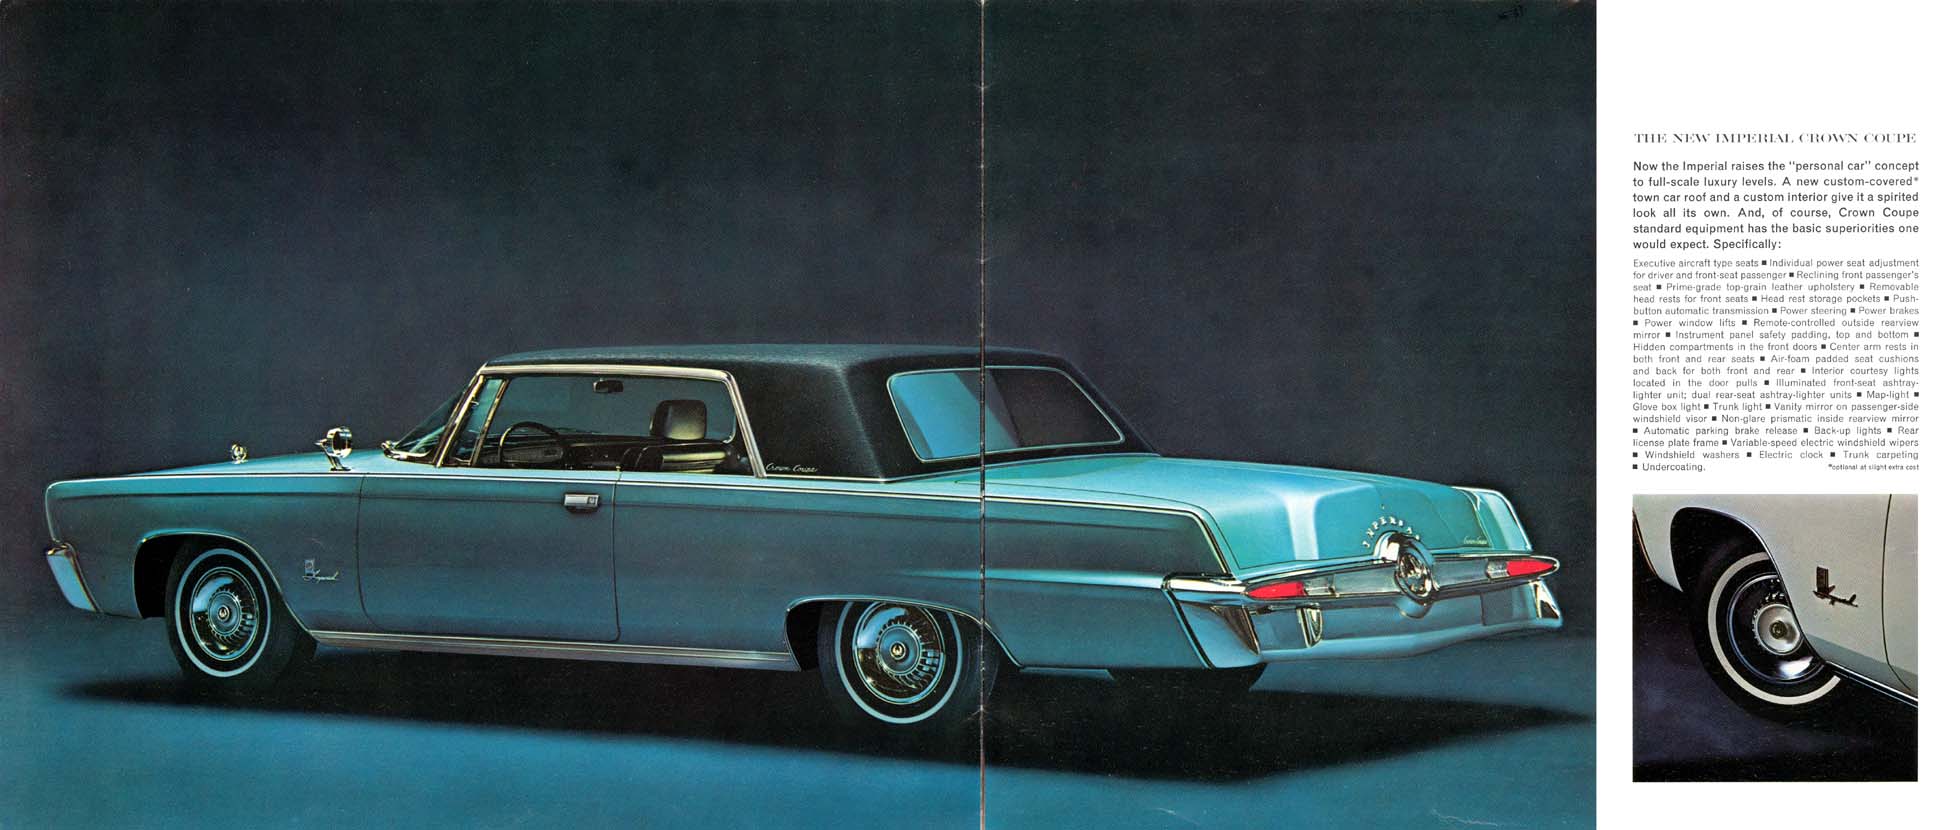 1964 Chrysler Imperial Brochure Page 13